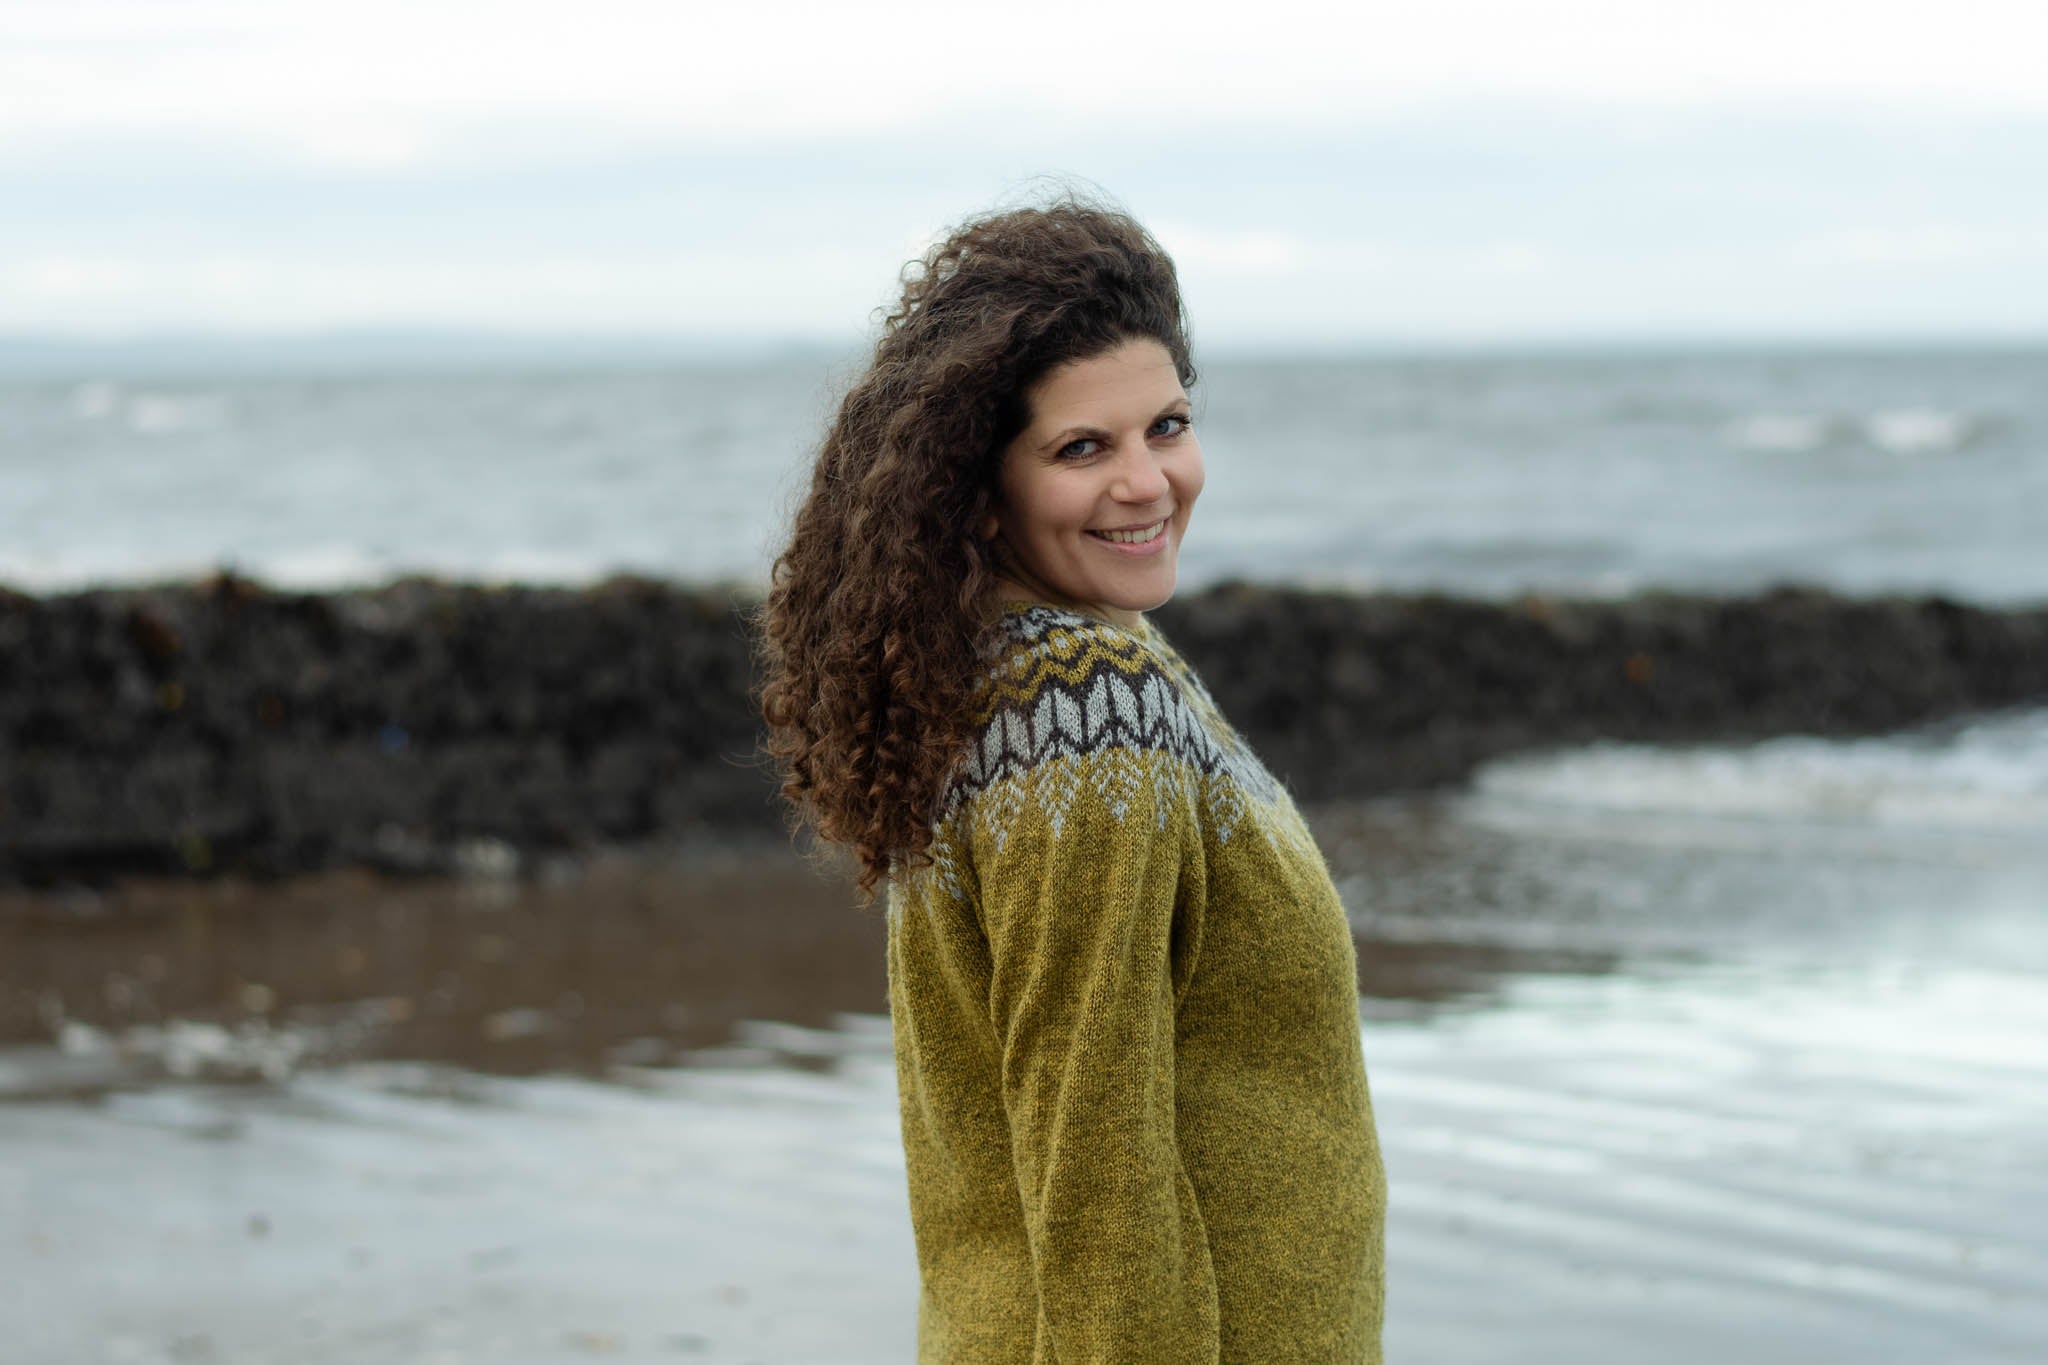 A white woman with long curly brunette hair stands on the beach smiling at the camera with the sea behind her. She is wearing an earthy green knit sweater with a dark brown and light grey colourwork yoke. Her arms hand down by her sides.